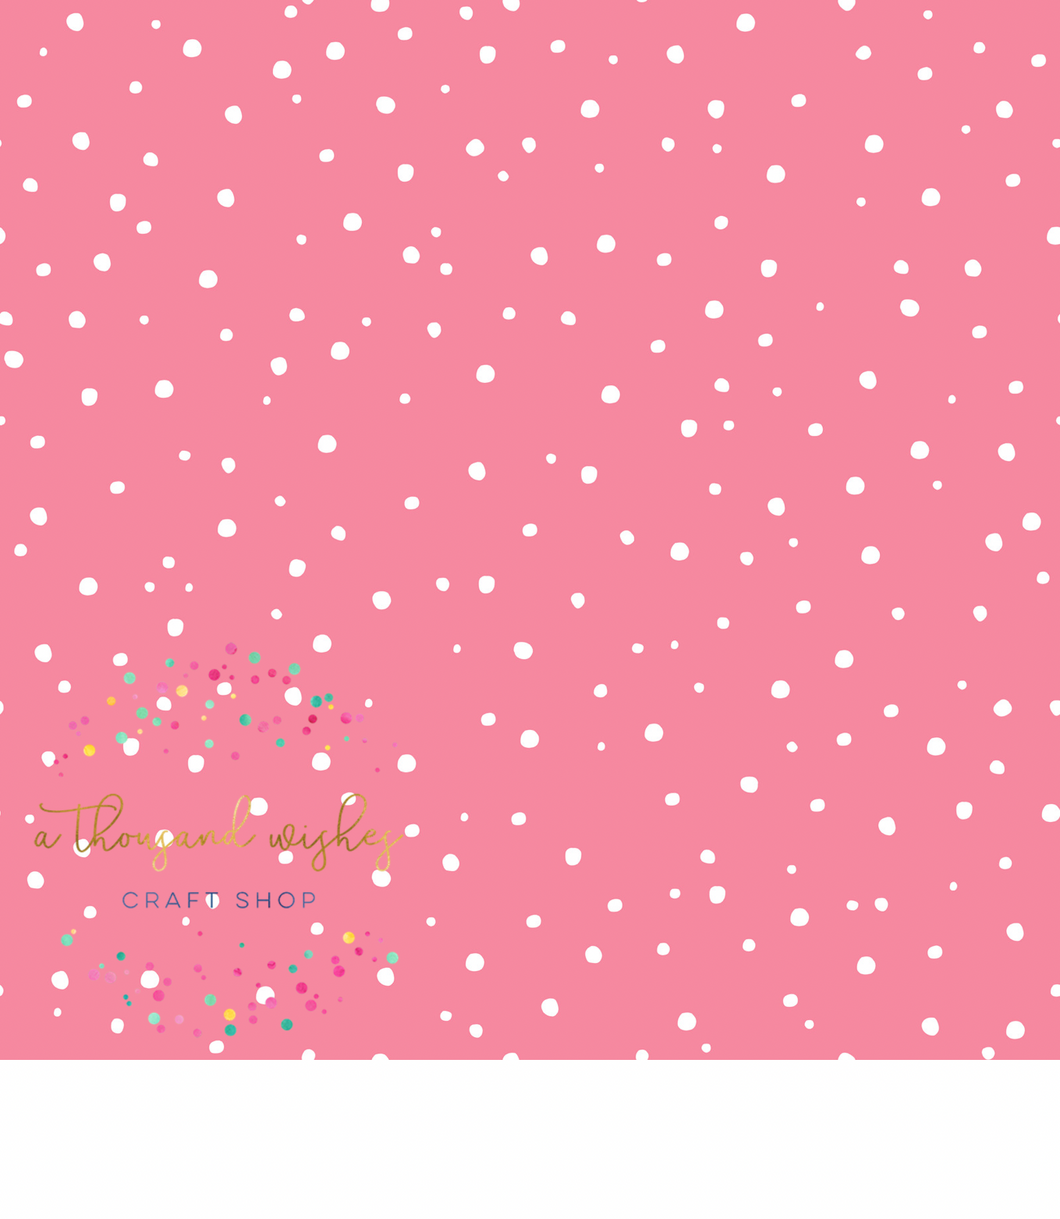 [CATE & RAINN] PINK SPECKLED - Avaleigh Bright Floral Collection